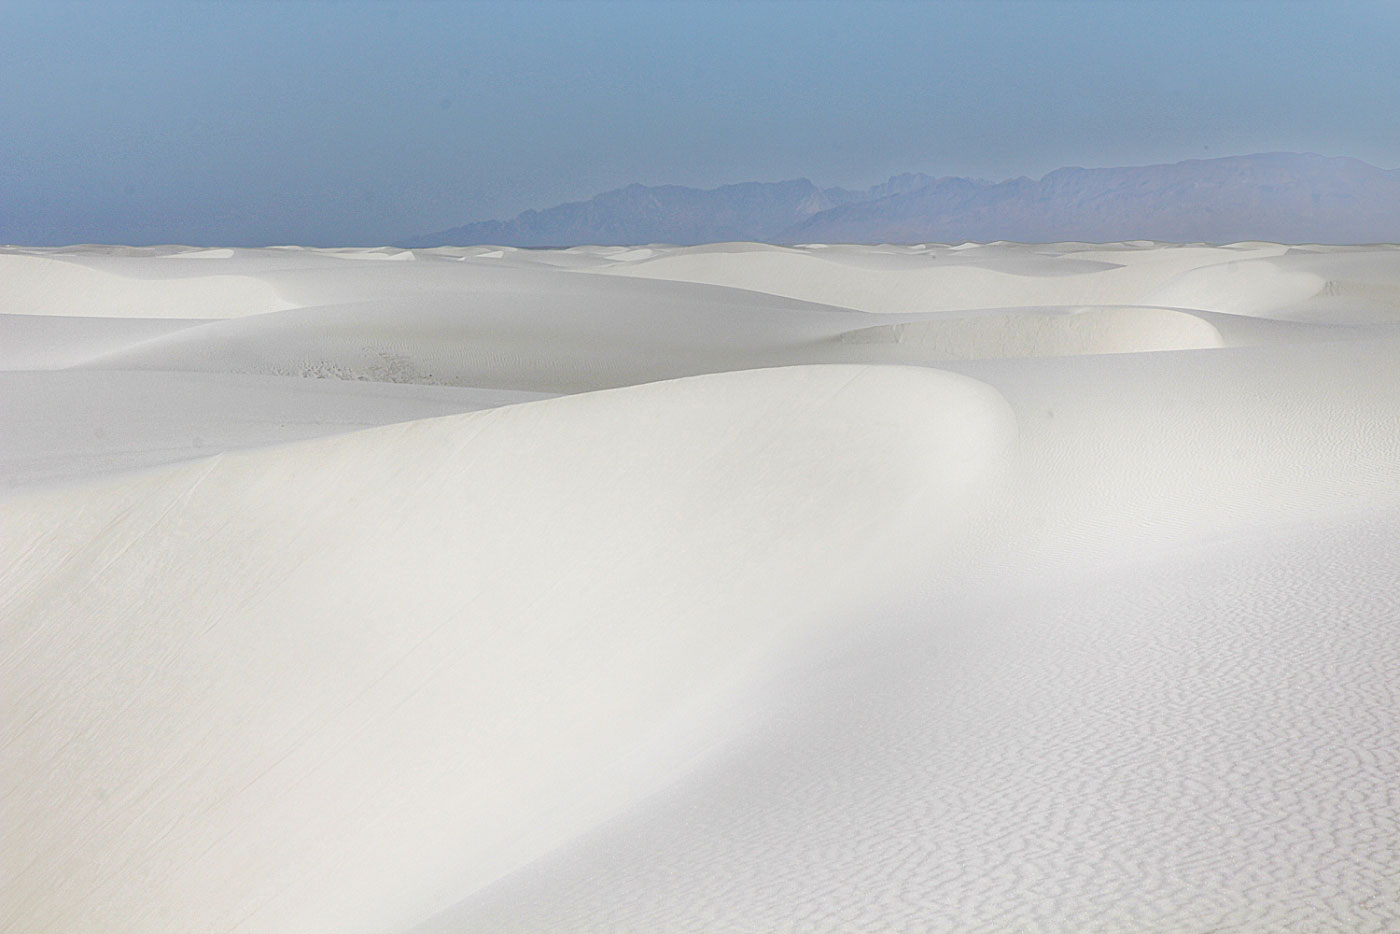 Hike Alkali Flat in White Sands National Monument, New Mexico - Stav is Lost